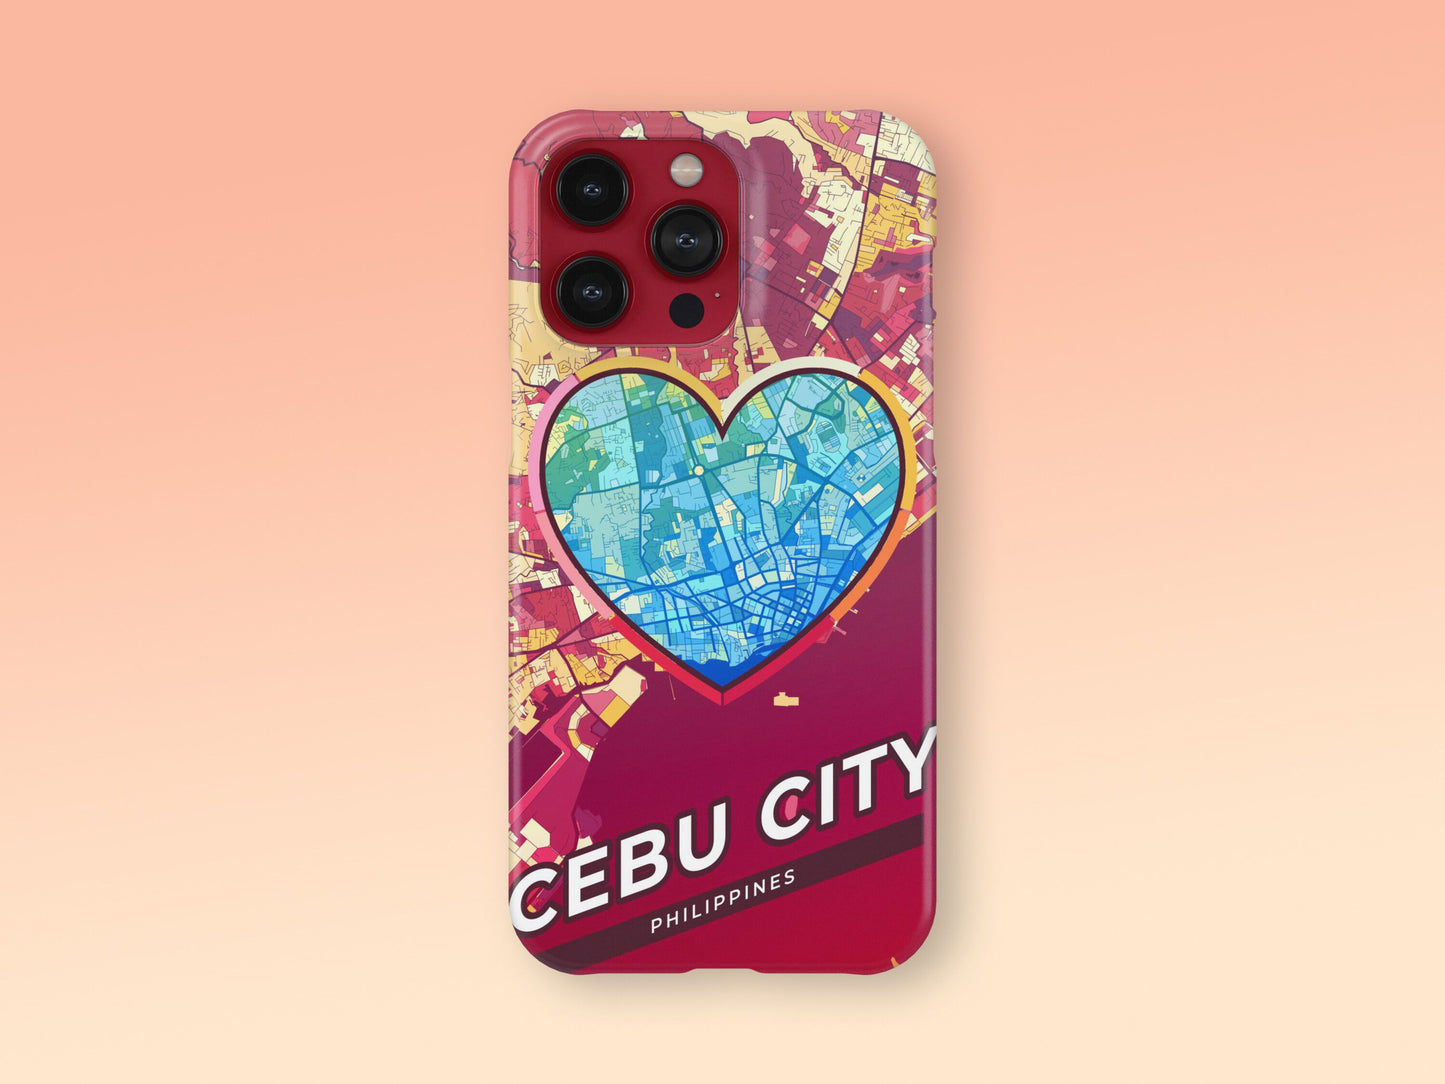 Cebu City Philippines slim phone case with colorful icon. Birthday, wedding or housewarming gift. Couple match cases. 2